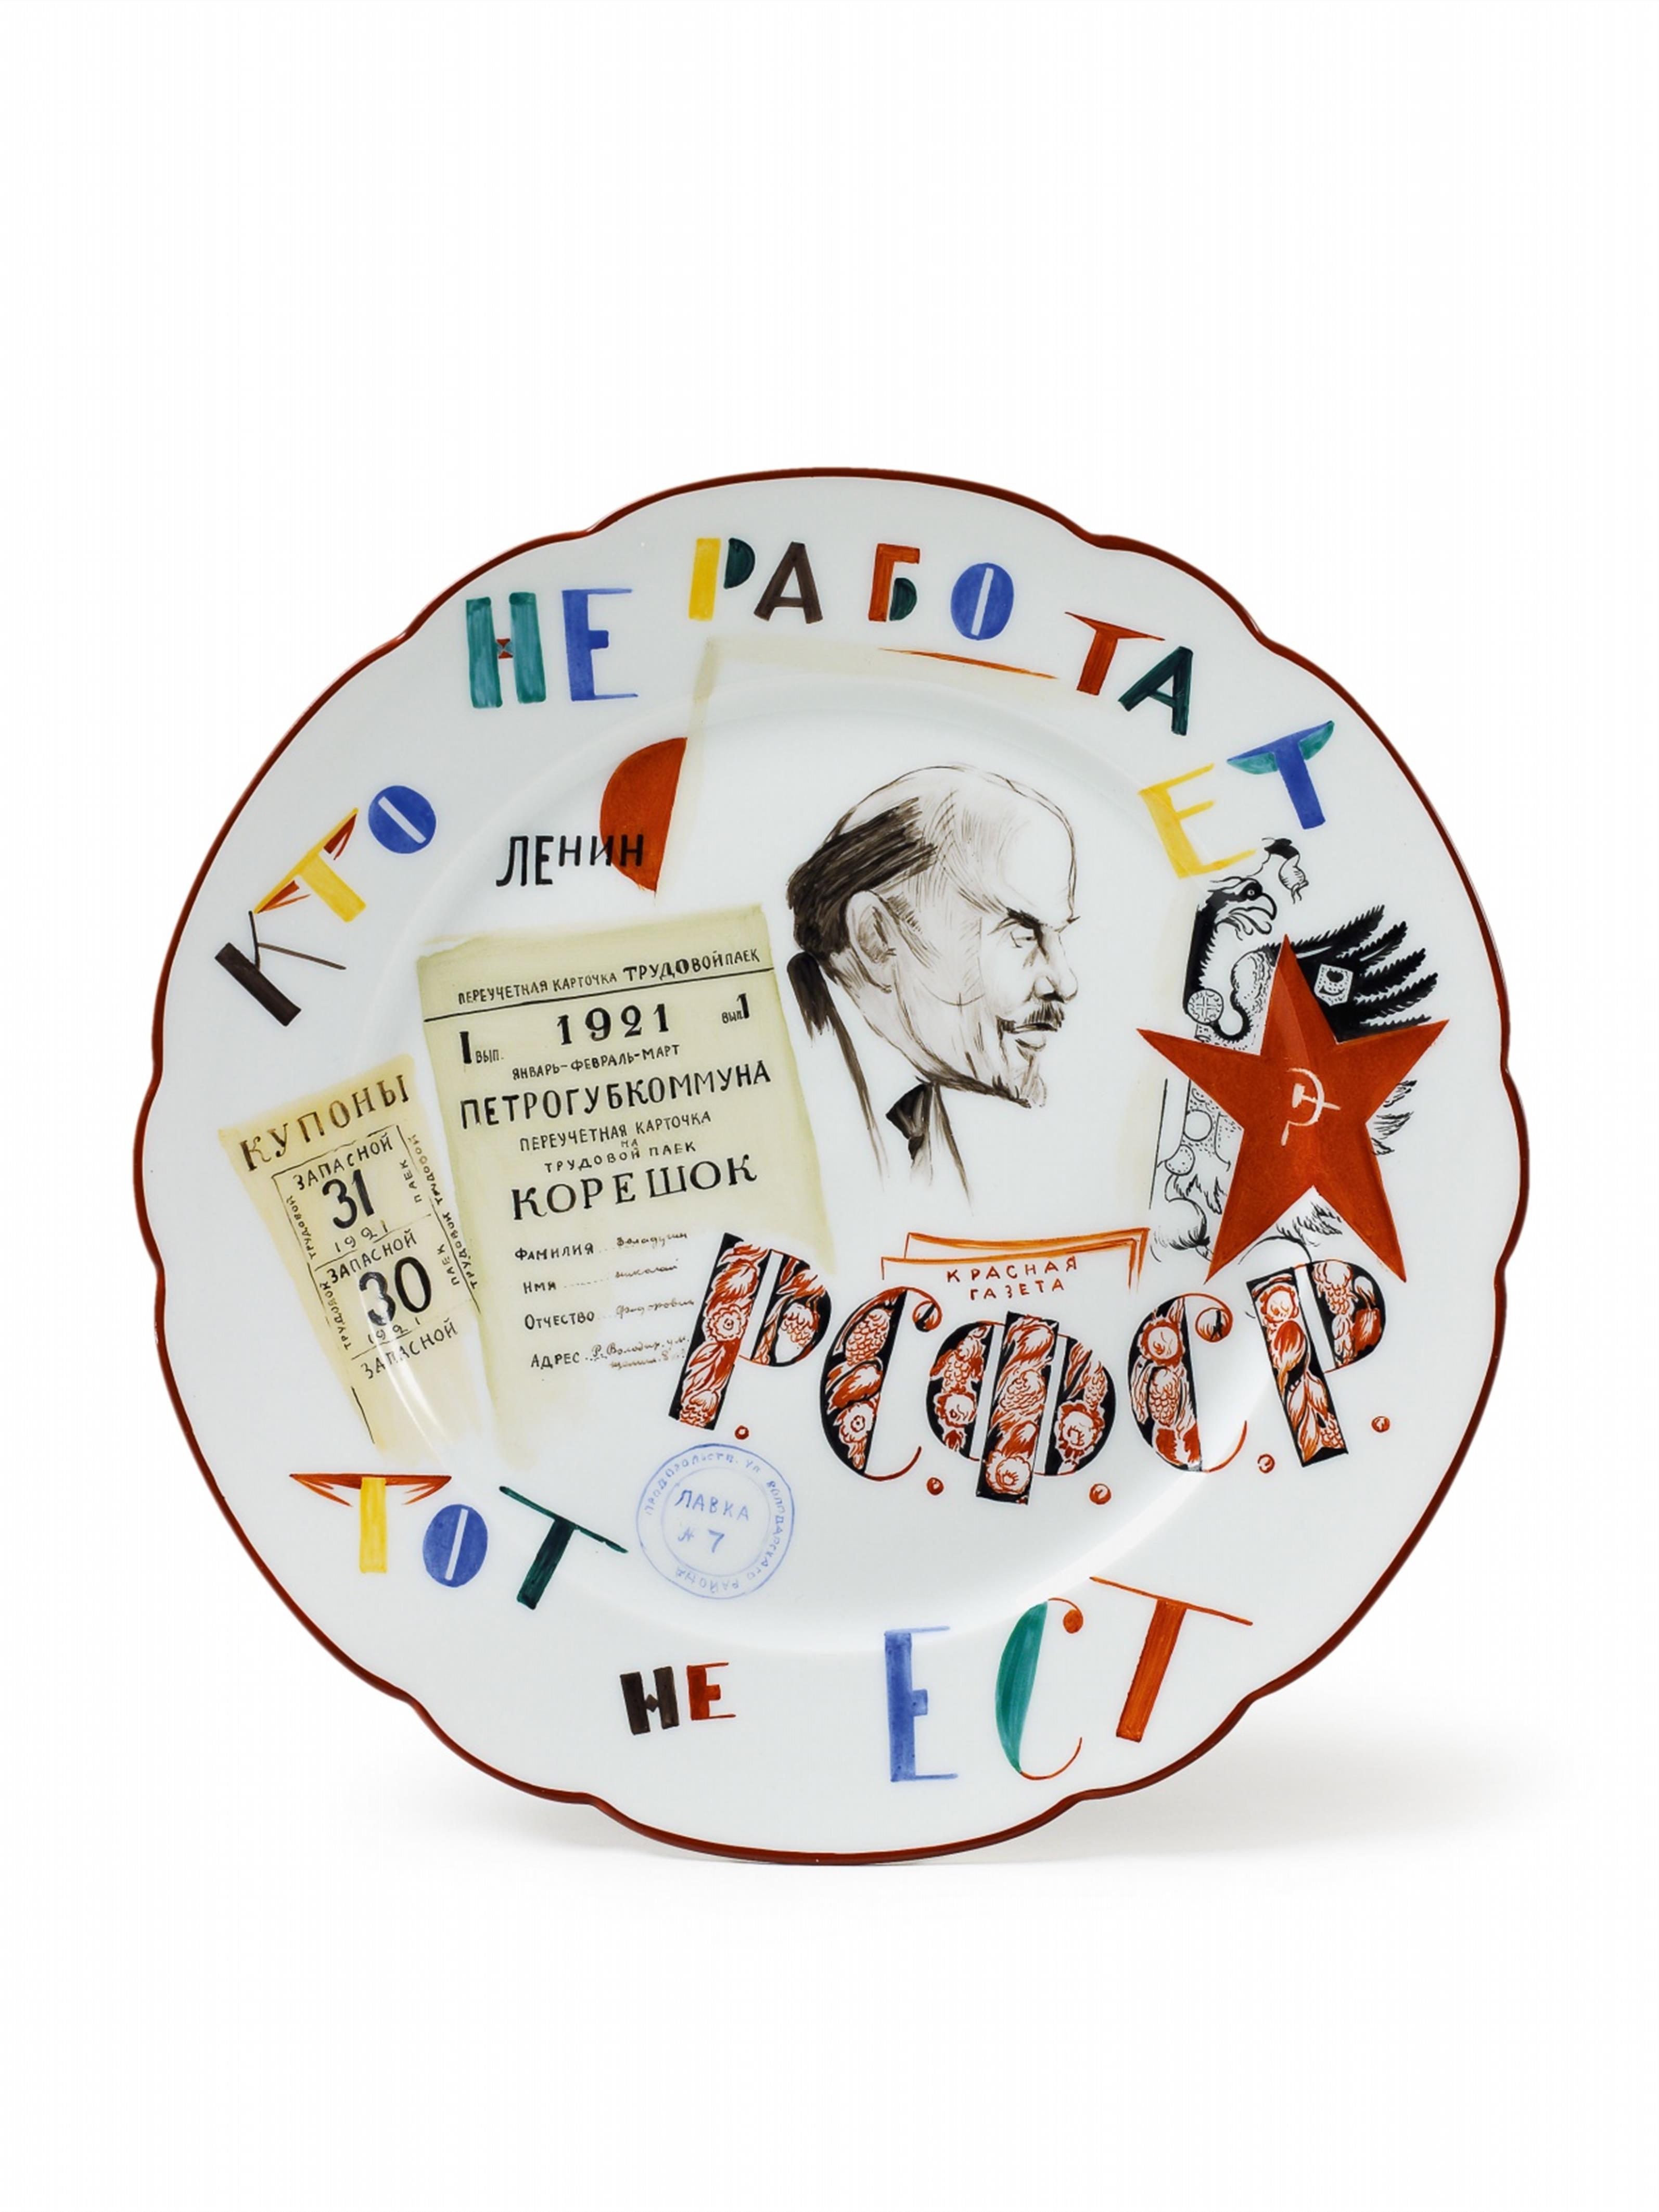 A scalloped porcelain plate decorated with an enamel portrait of Lenin and inscribed "He who does not work shall not eat". - image-1